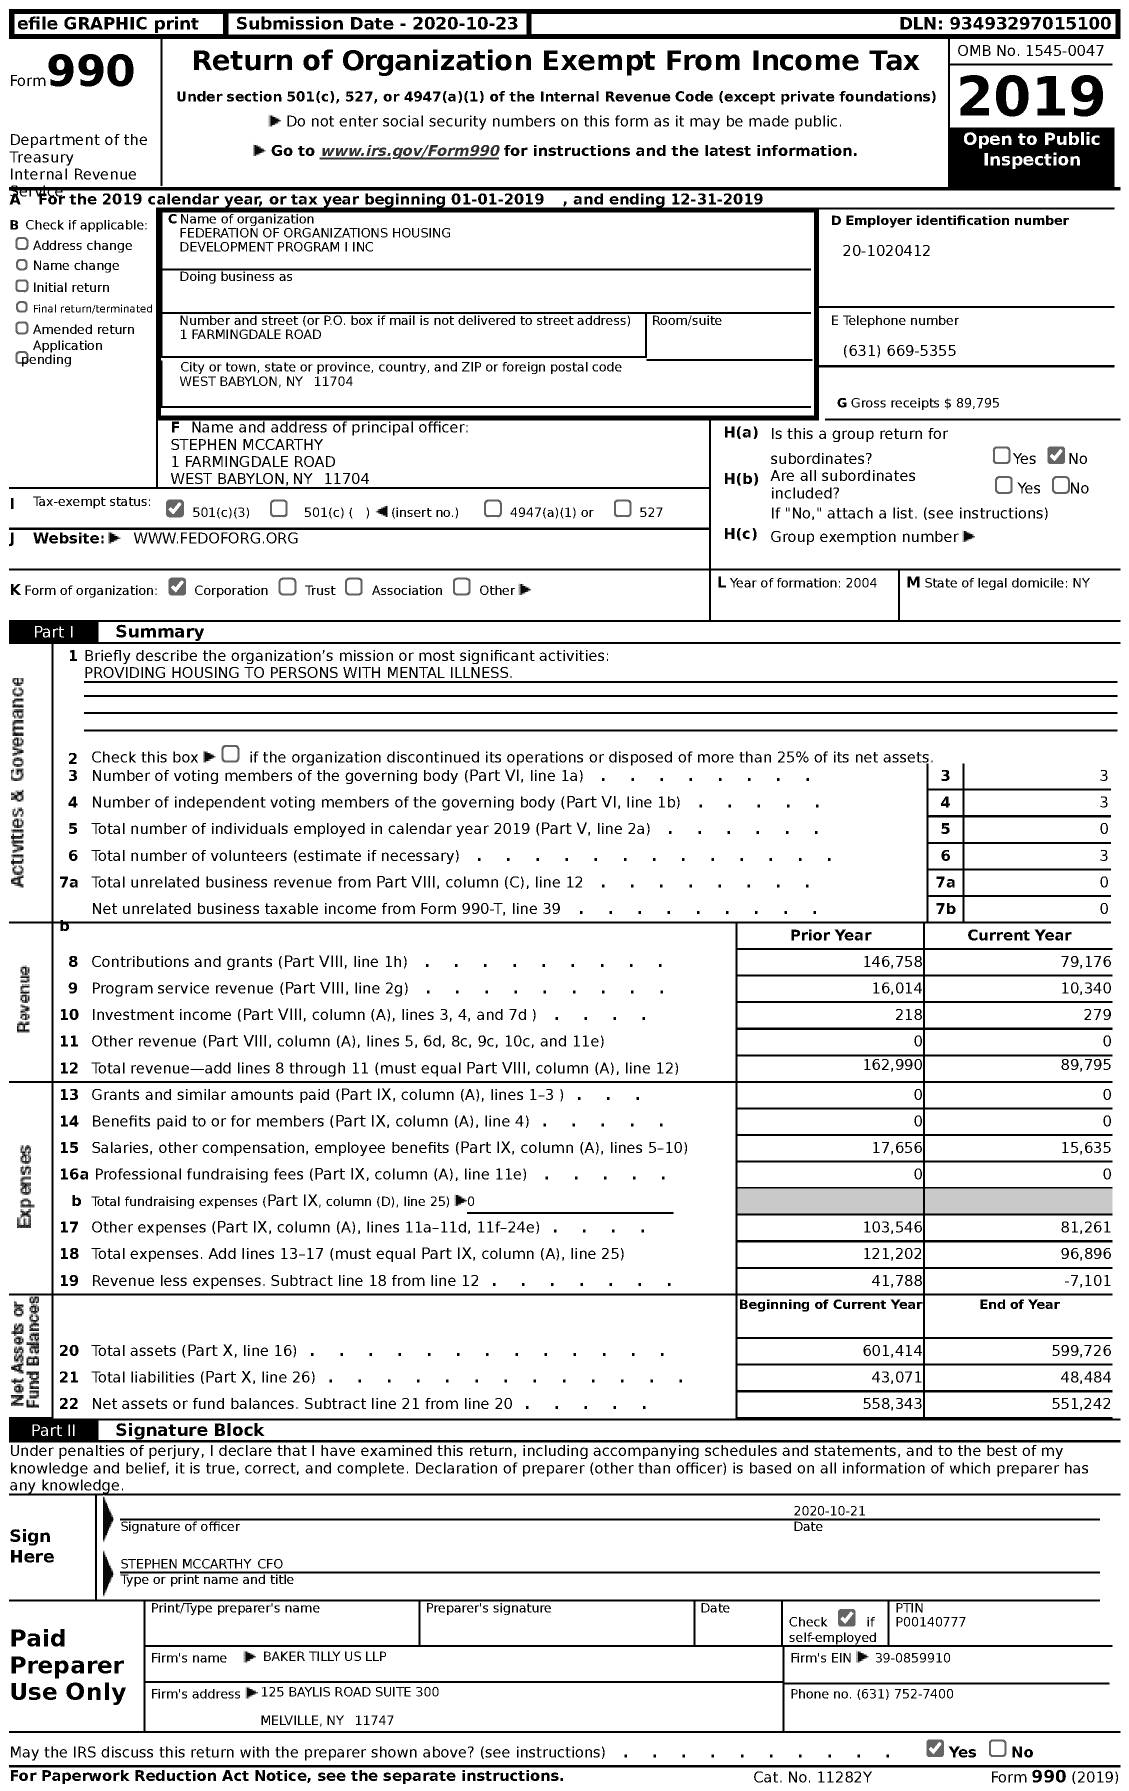 Image of first page of 2019 Form 990 for Federation of Organizations Housing Development Program I